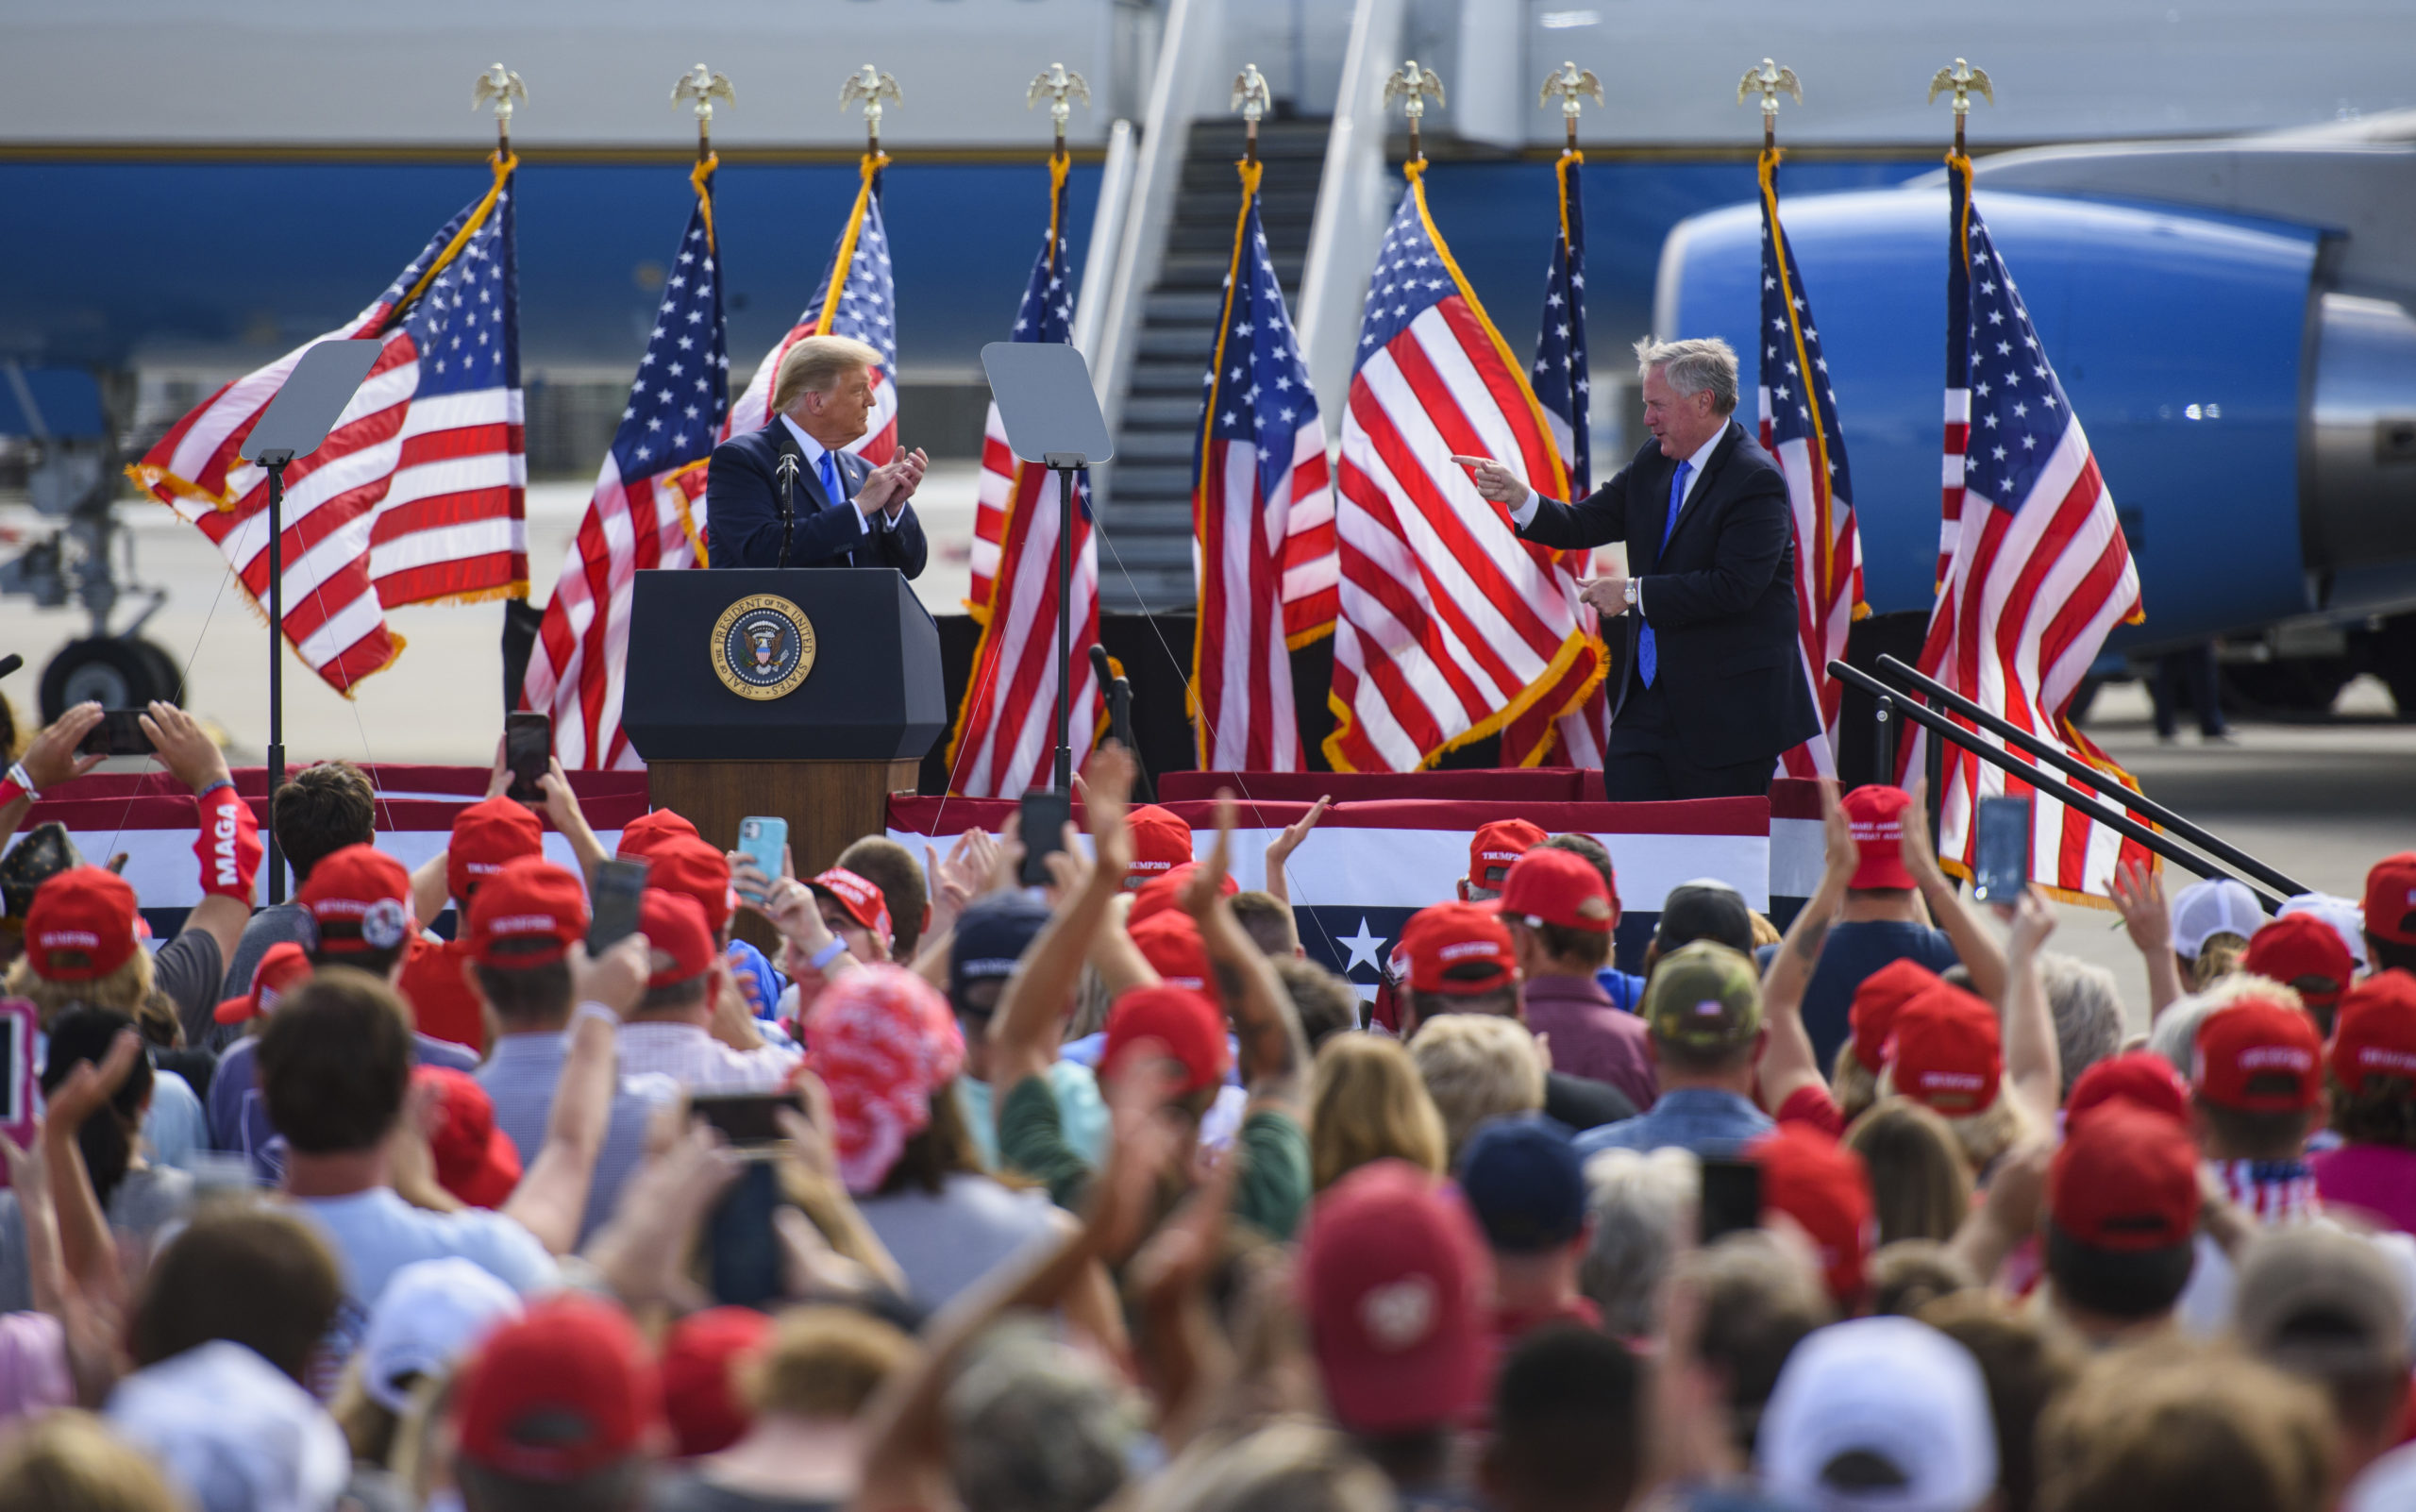 GREENVILLE, NC - OCTOBER 15: President Donald Trump and White House Chief of Staff Mark Meadows appear on stage during a Make America Great Again rally at the Pitt-Greenville Airport on October 15, 2020 in Greenville, North Carolina. Thousands of people gathered to listen to the President 19 days before the 2020 presidential election. (Photo by Melissa Sue Gerrits/Getty Images)